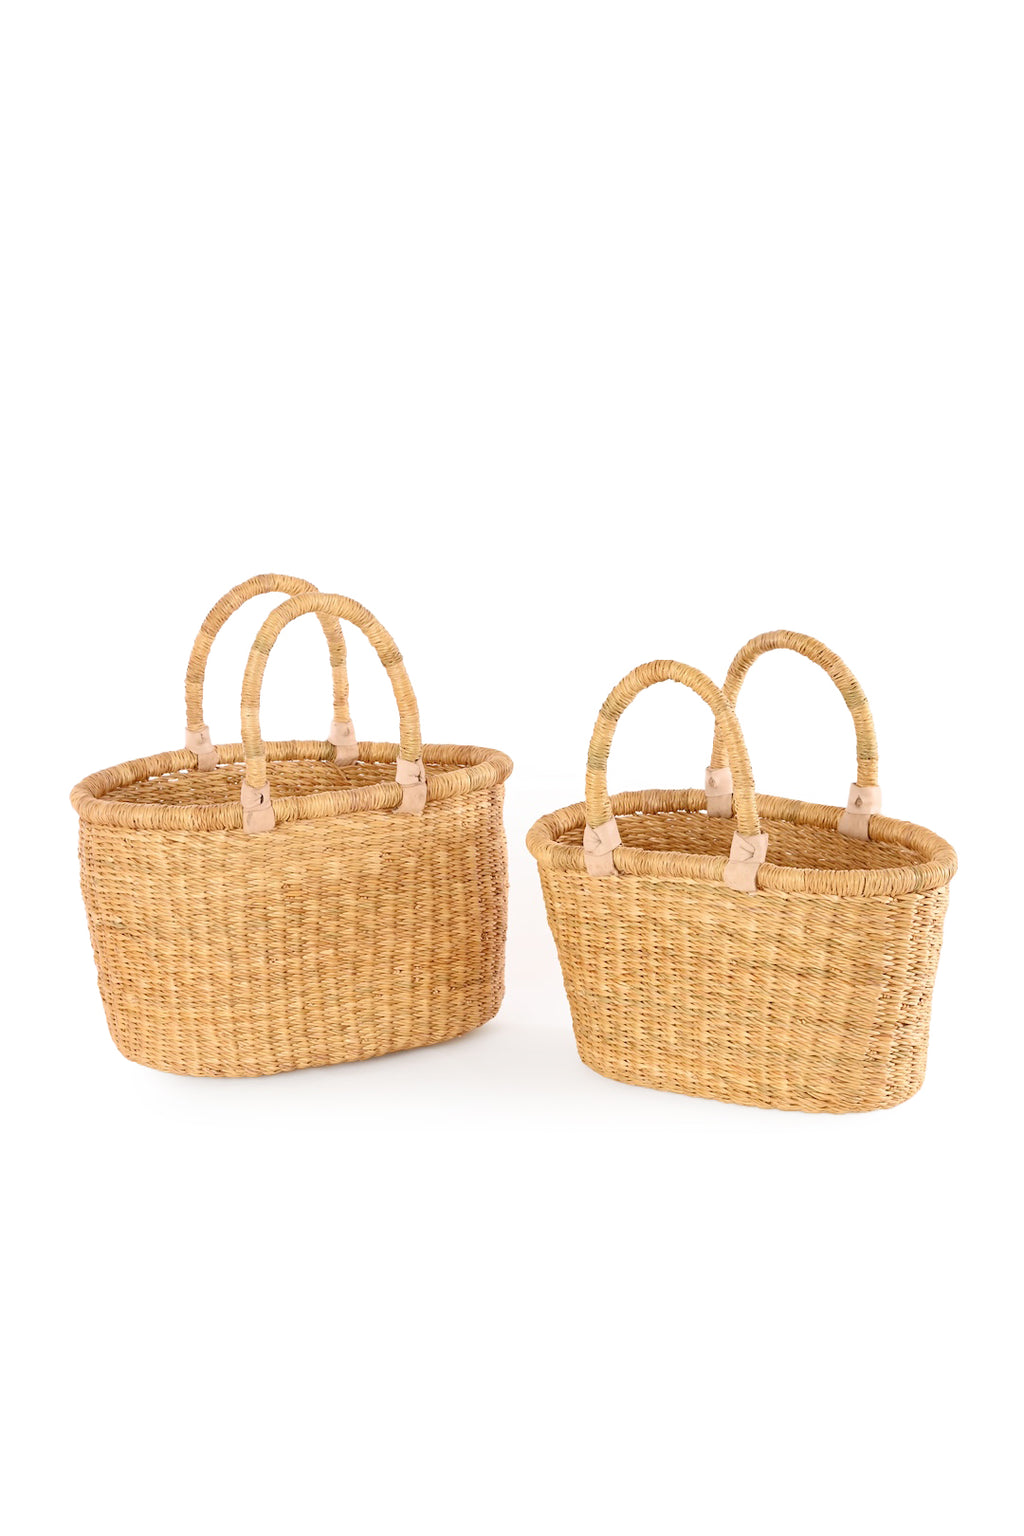 Set of Two Nesting Totes - Natural with Leather Accents